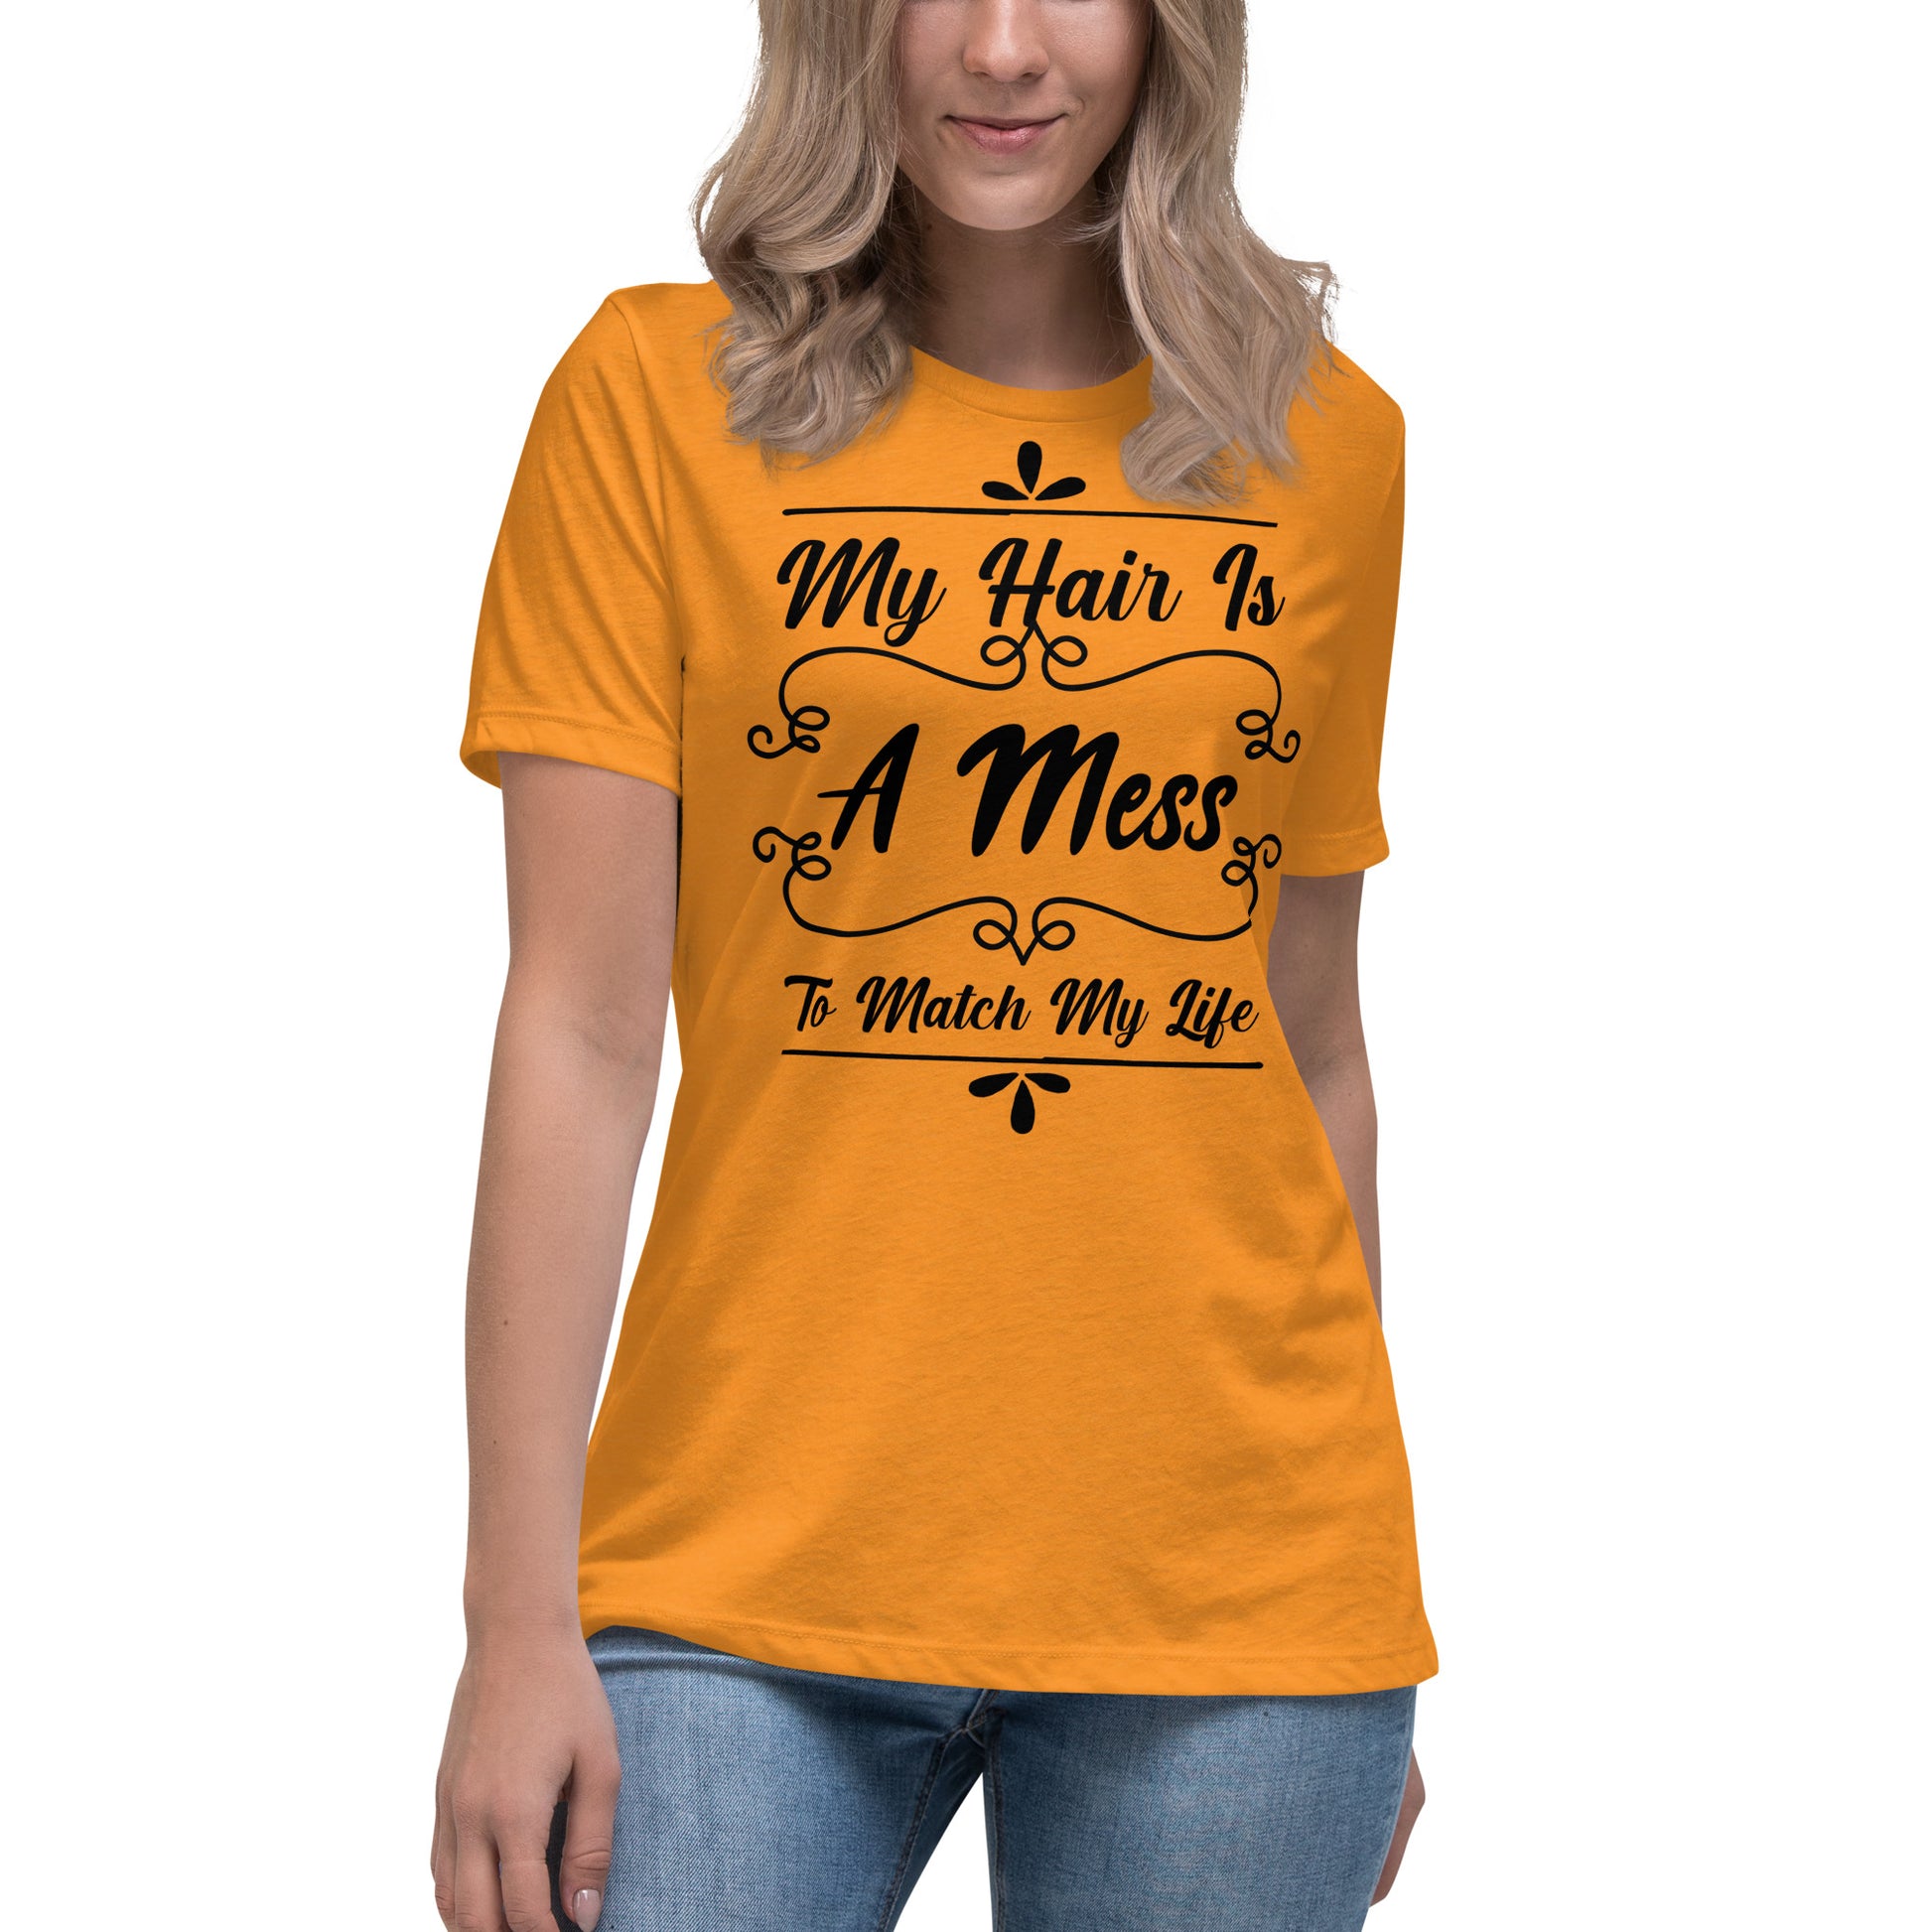 My Hair is a Mess to Match My Life Women's Relaxed T-Shirt